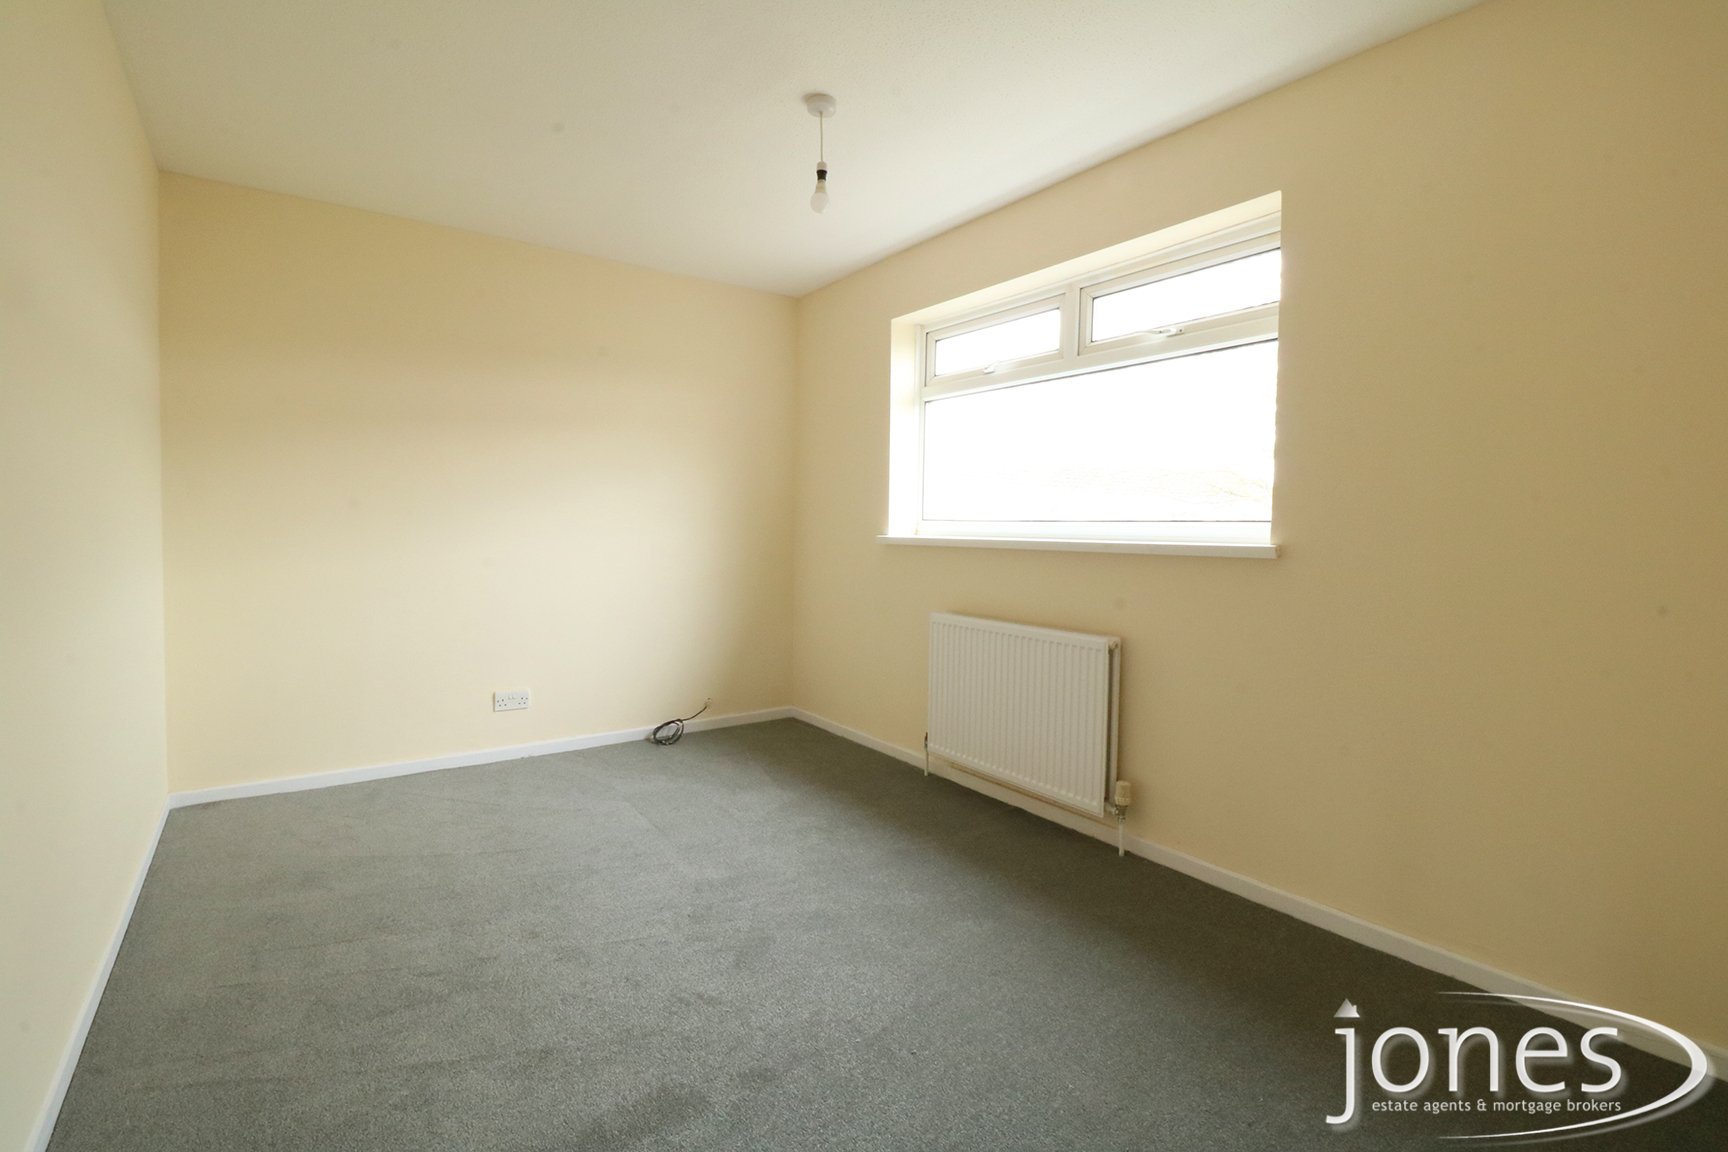 Home for Sale Let - Photo 09 Valiant Way, Thornaby, Stockton on Tees, TS17 9PD